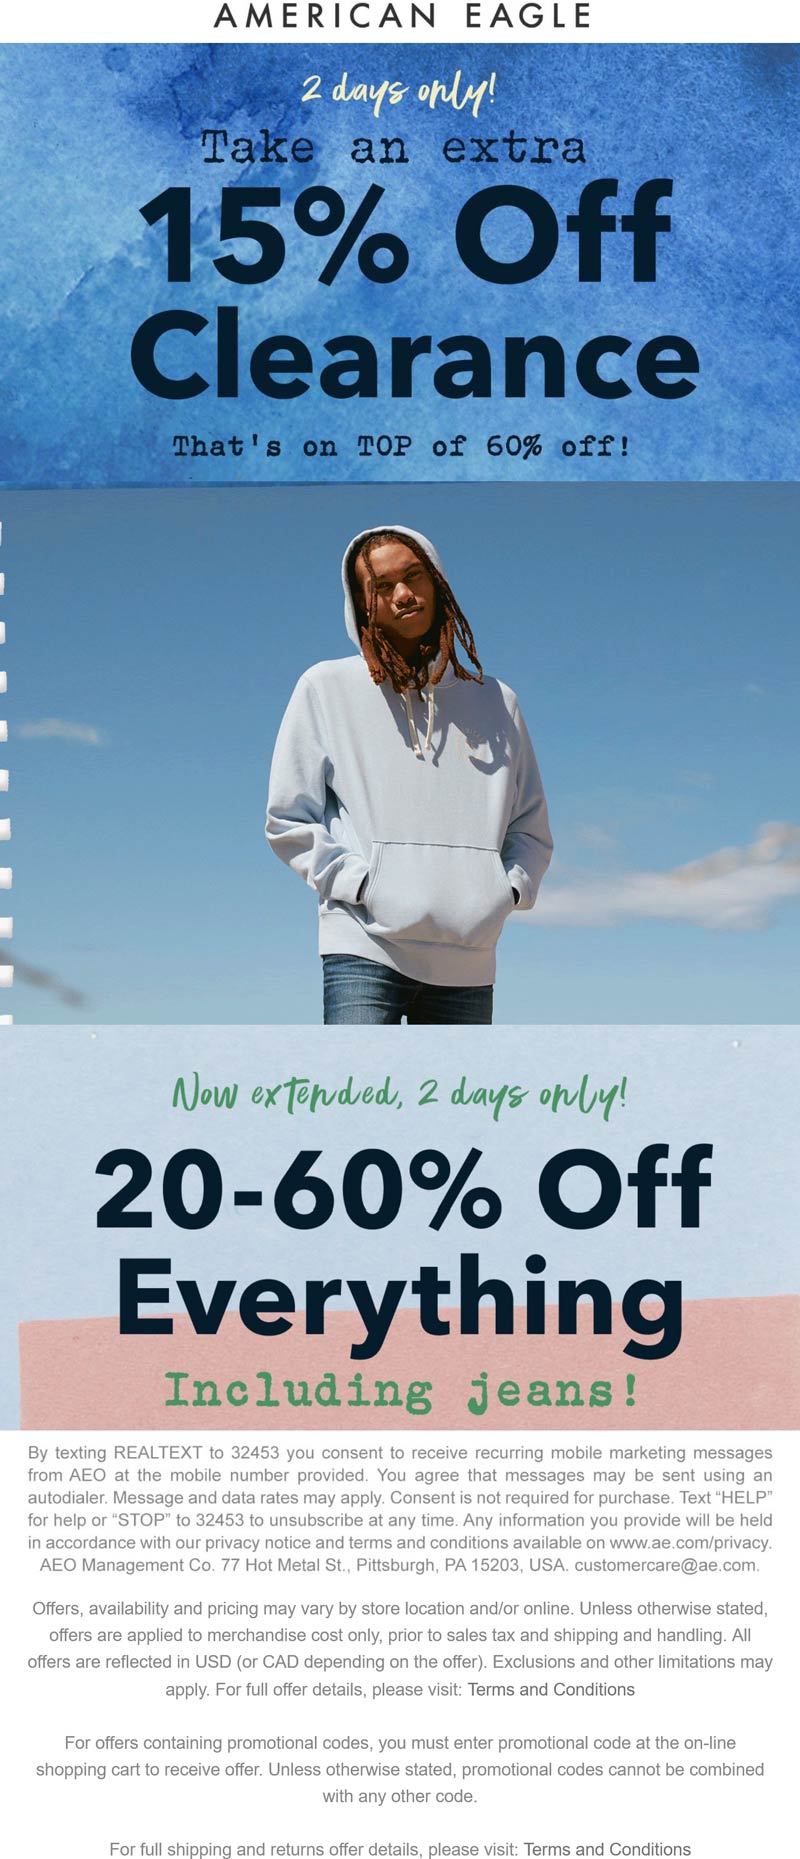 American Eagle stores Coupon  20-60% off everything + extra 15% off clearance at American Eagle #americaneagle 